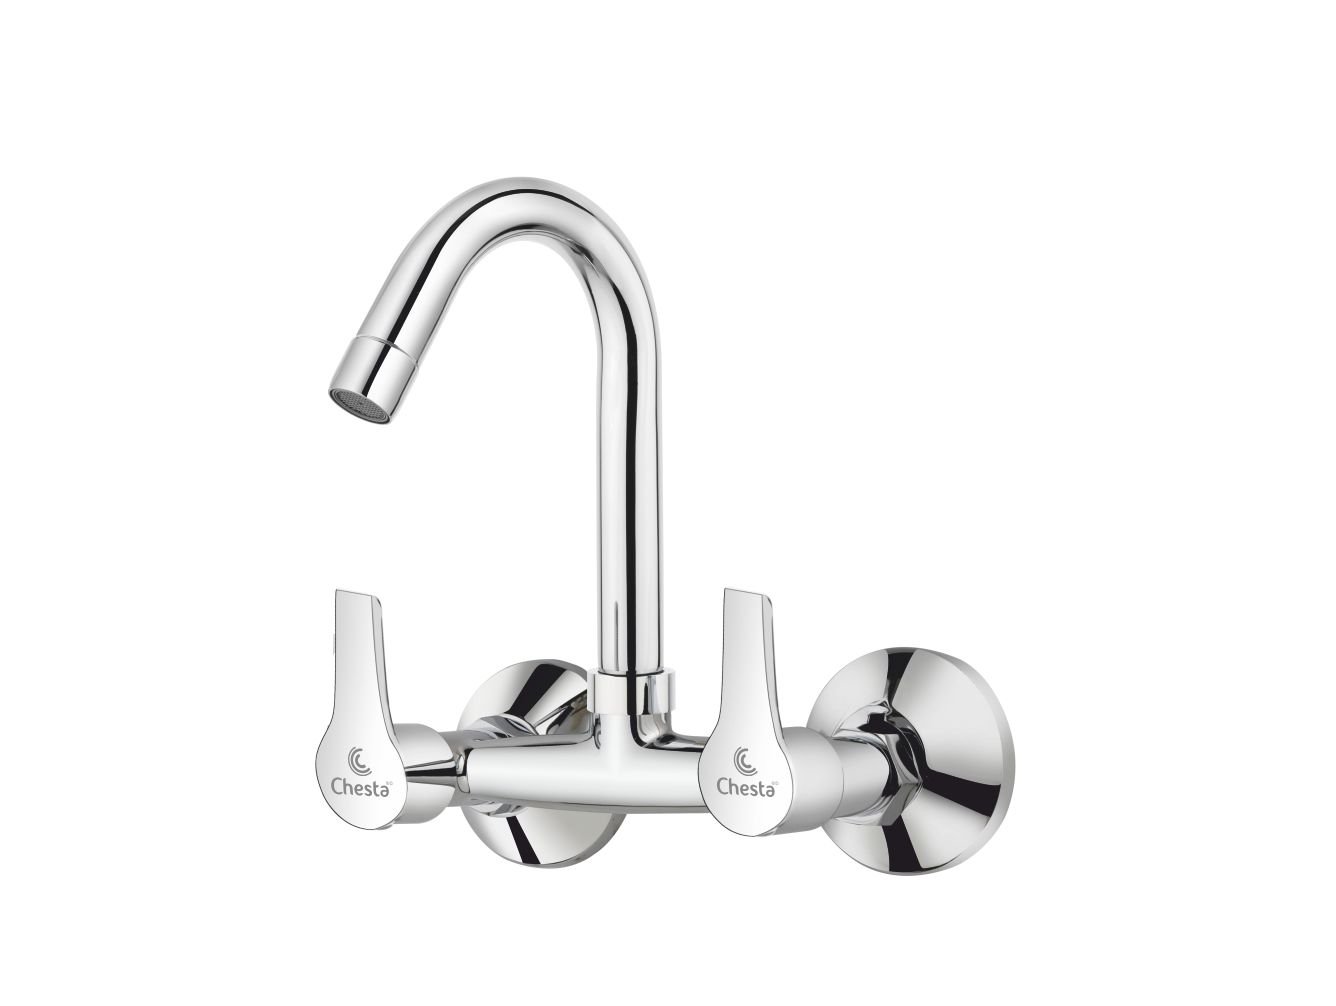 DY - 1016 - Sink Mixer by Chesta Bath Fittings